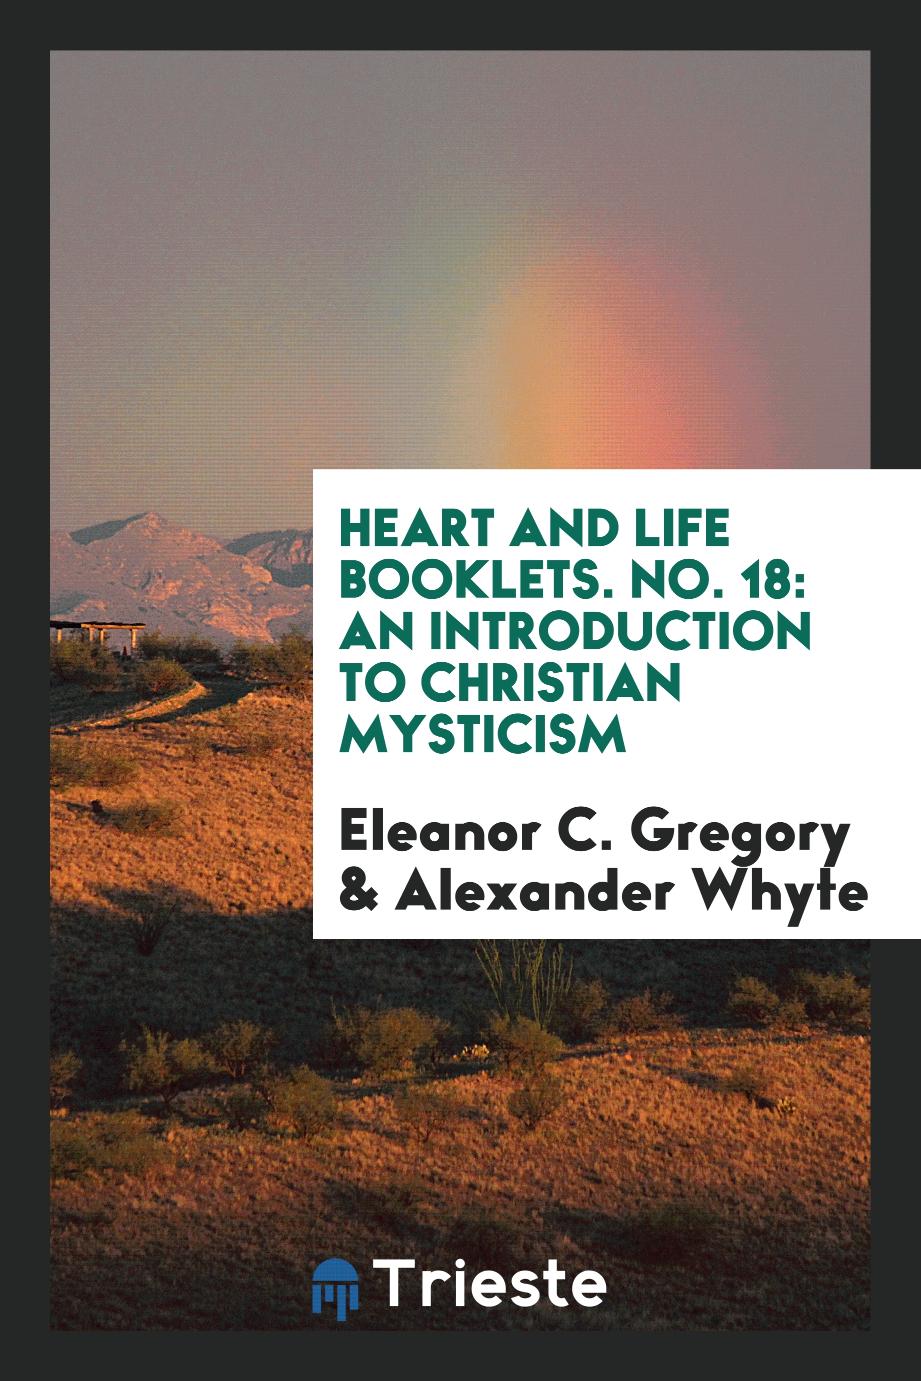 Heart and life booklets. No. 18: An Introduction to Christian Mysticism